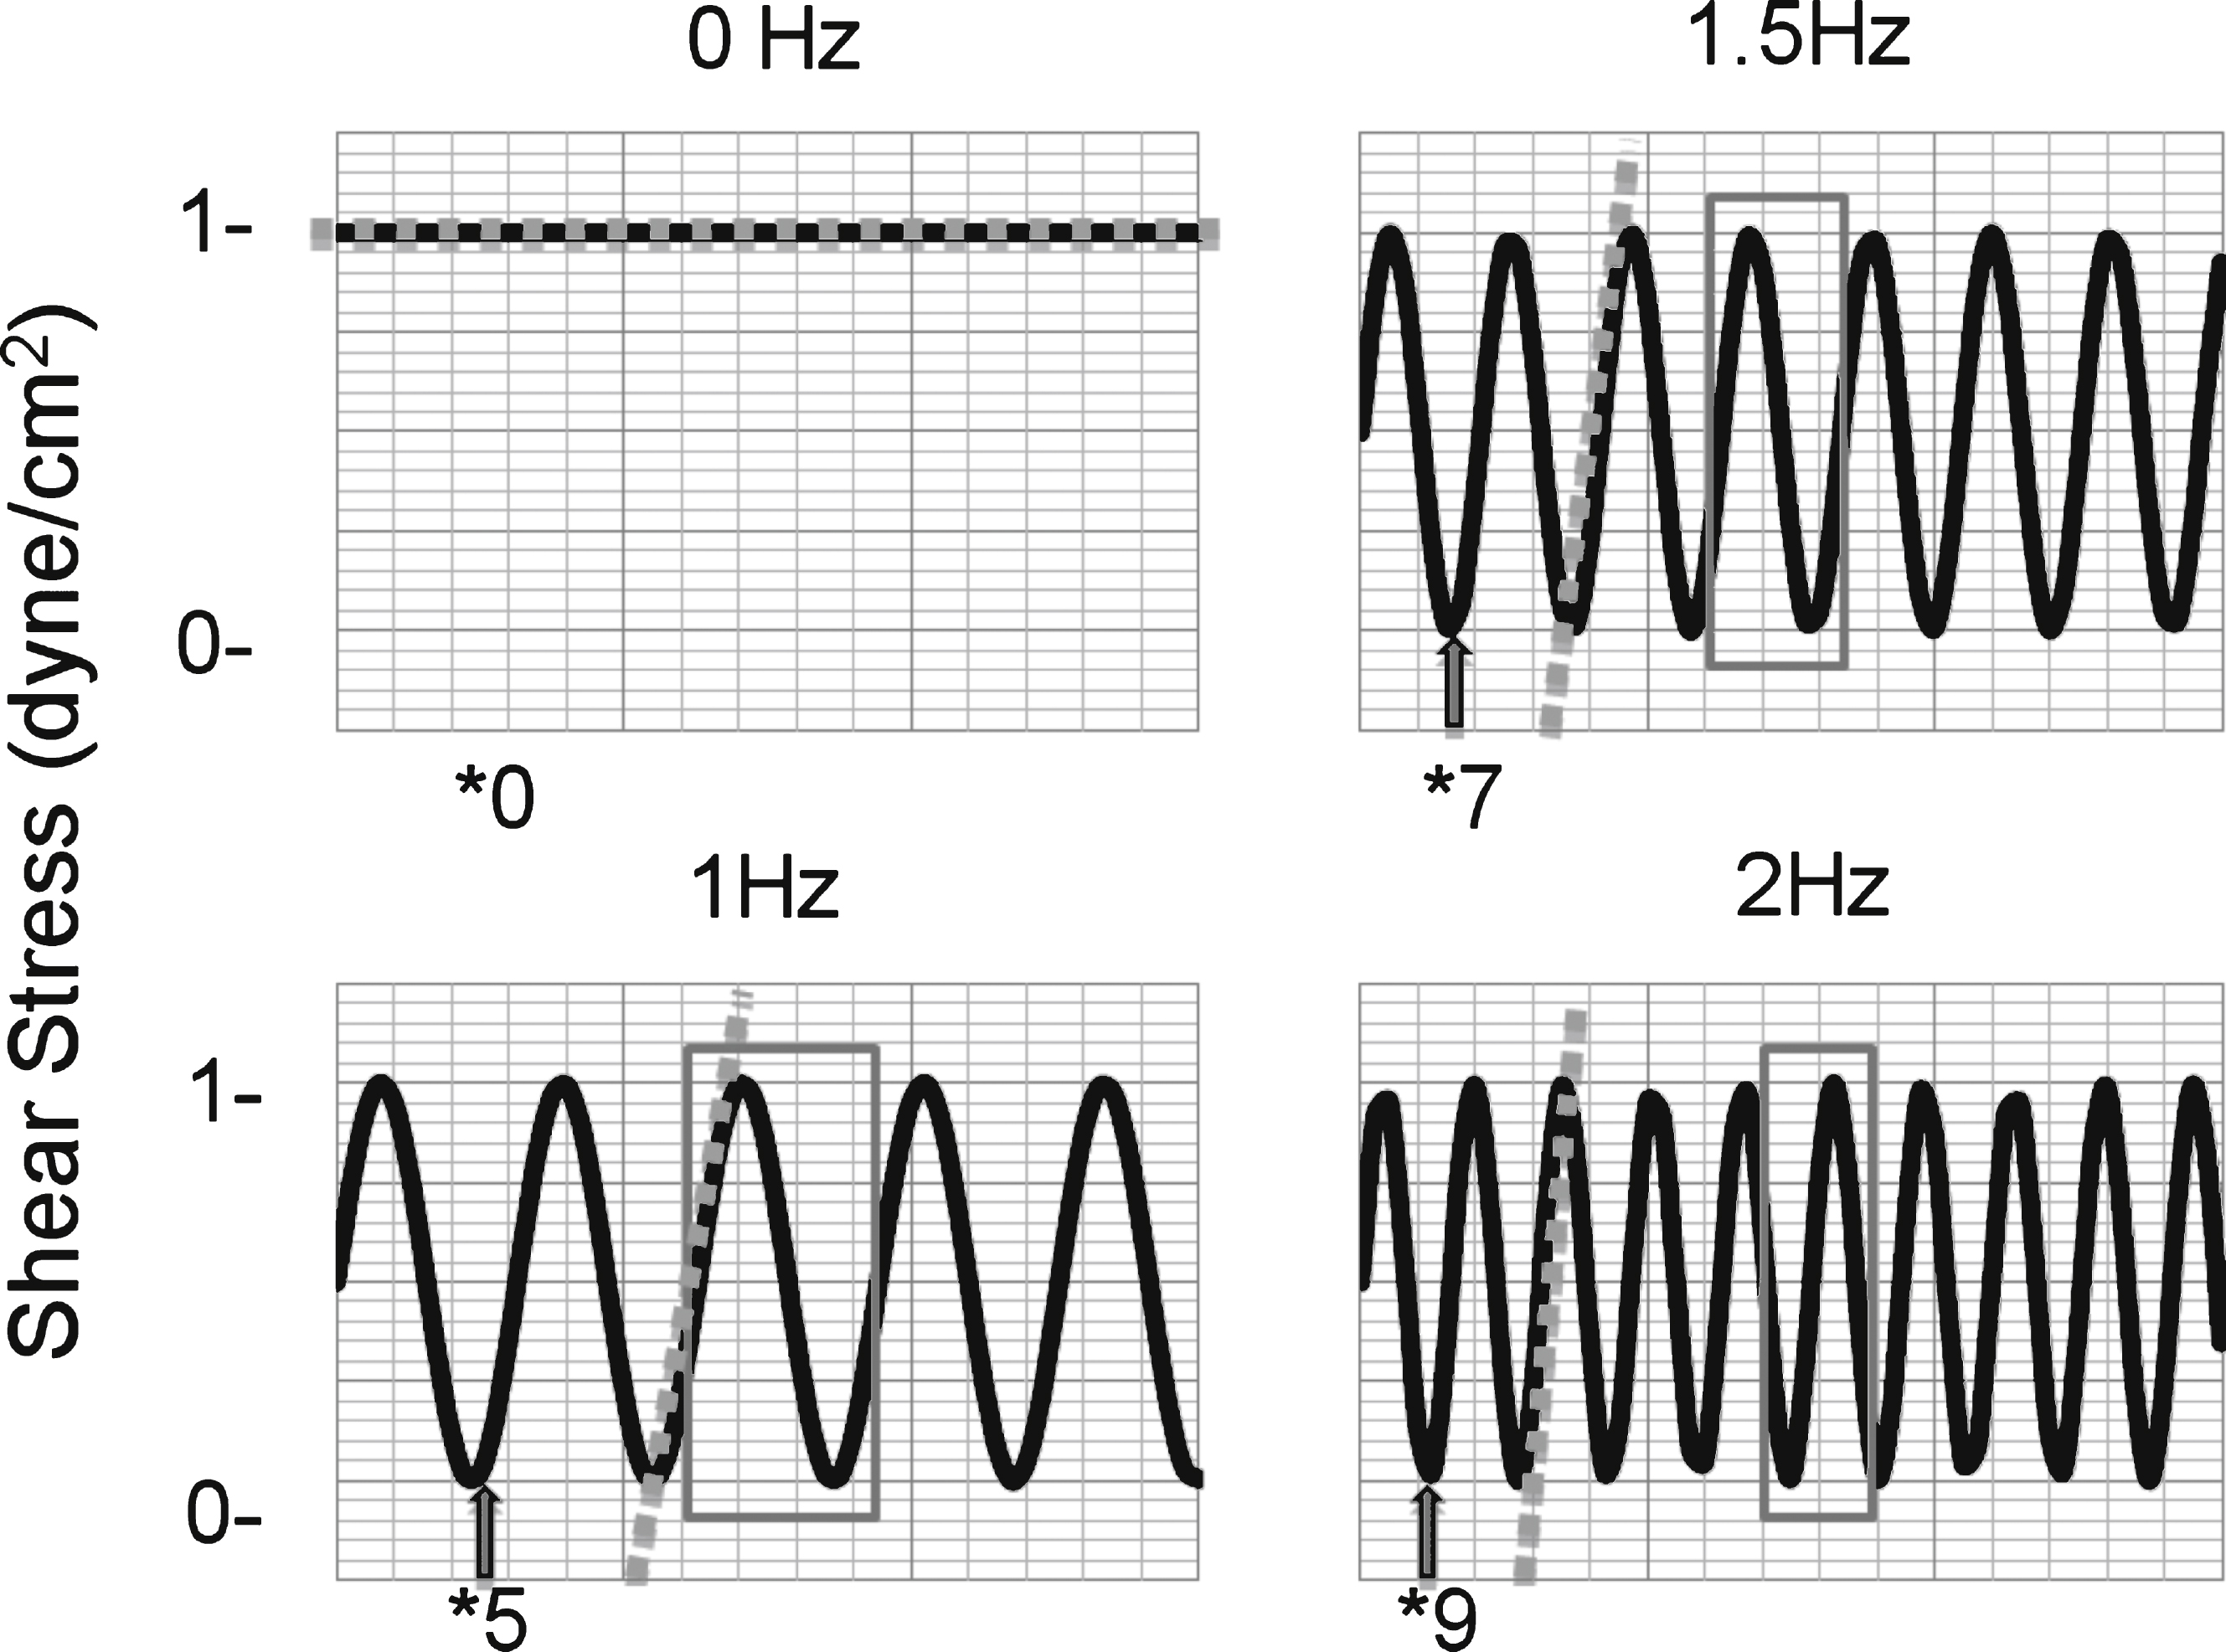 Sample waveforms at maximum amplitude of 1 dyne/cm2. Each cycle is shown within the boxed region. The length of each cycle decreases with increasing frequency. During non-pulsatile flow, a constant pressure is applied to the interface to maintain a user-defined shear, 1 dyne/cm2. To establish pulsatile flow pressure oscillates from 0 to the pressure required to establish 1 dyne/cm2. The grey arrows represent the low shear period of the oscillatory cycle, where we propose many adhesive interactions take place. The number below represents the amount of these low shear periods that occur during the same period. The dashed grey lines represent the slope of the linear region of each oscillation. The slope increases as the frequency increases.